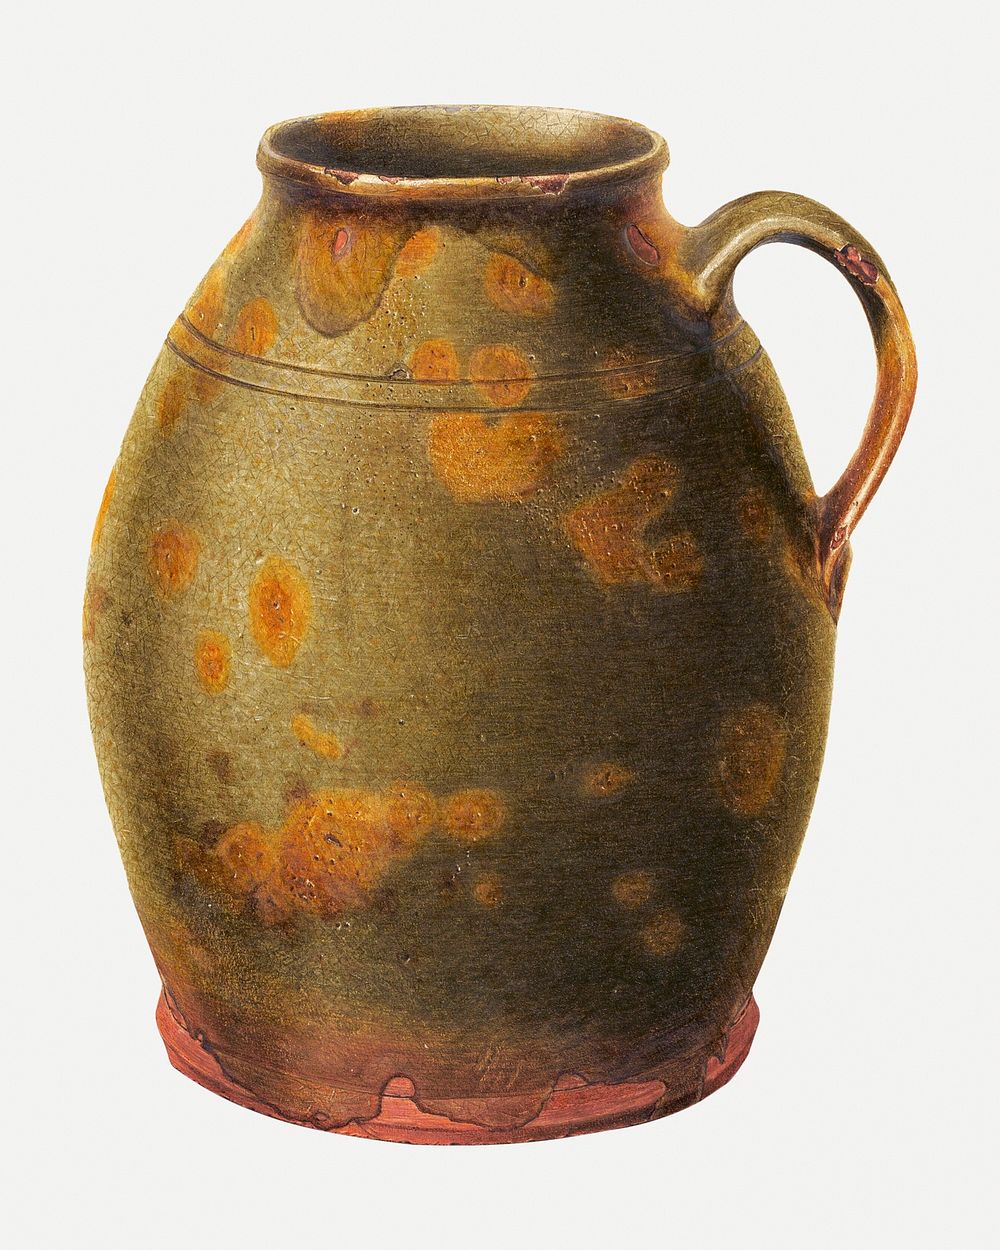 Vintage jug psd illustration, remixed from the artwork by Alfred Parys